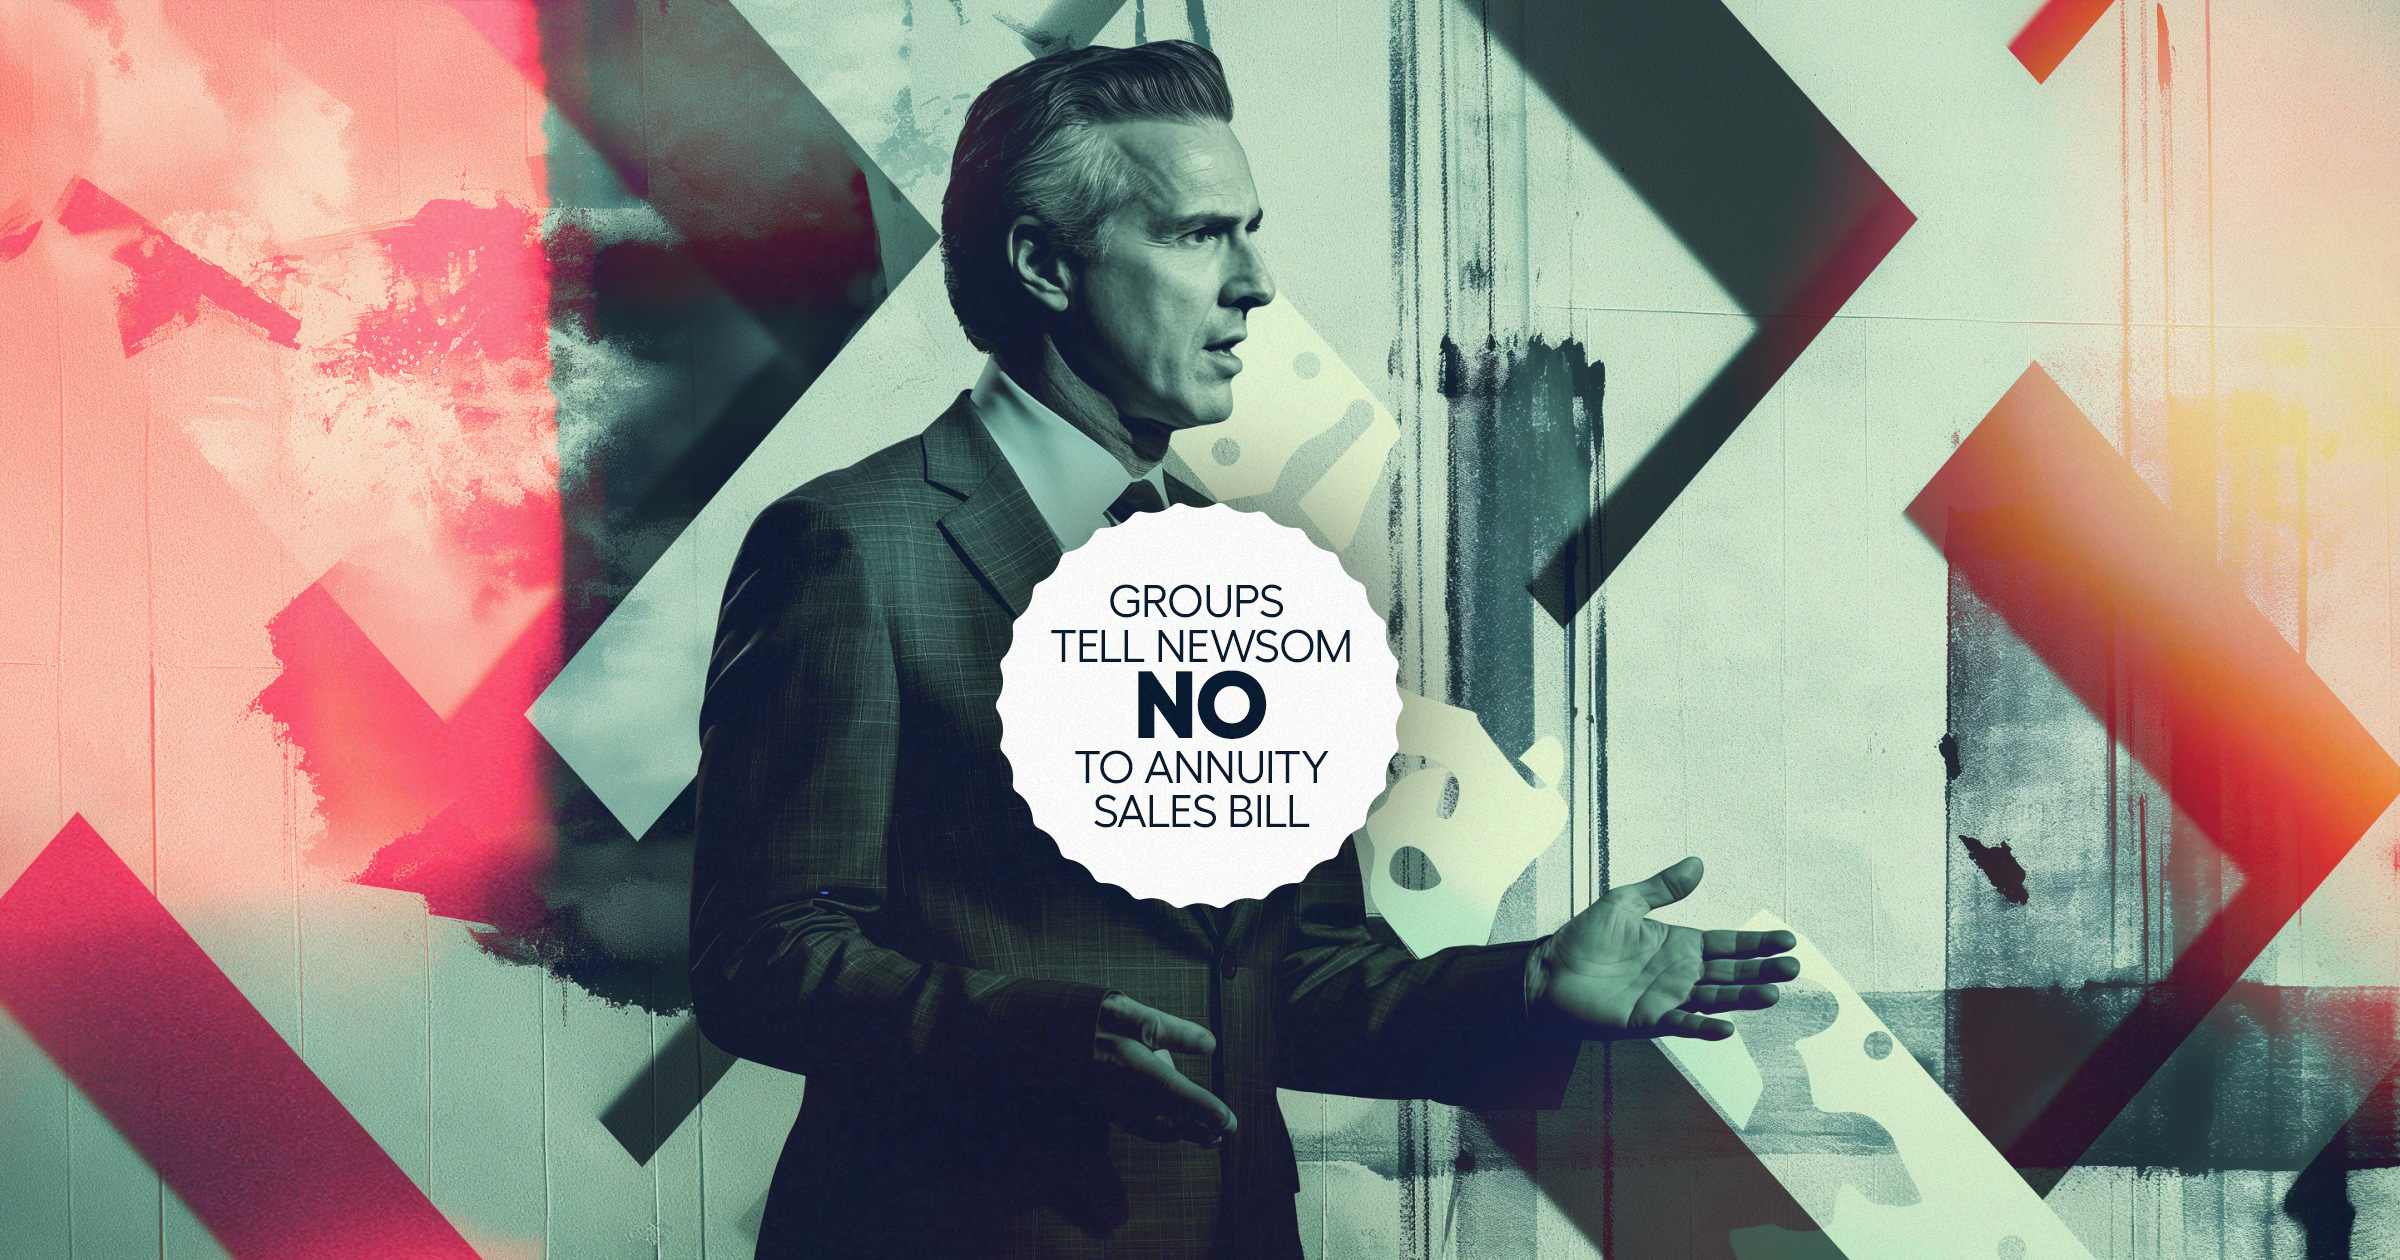 Image shows Calif. Gov. Gavin Newsom and the words "Groups tell Newsom No to annuity sales bill."